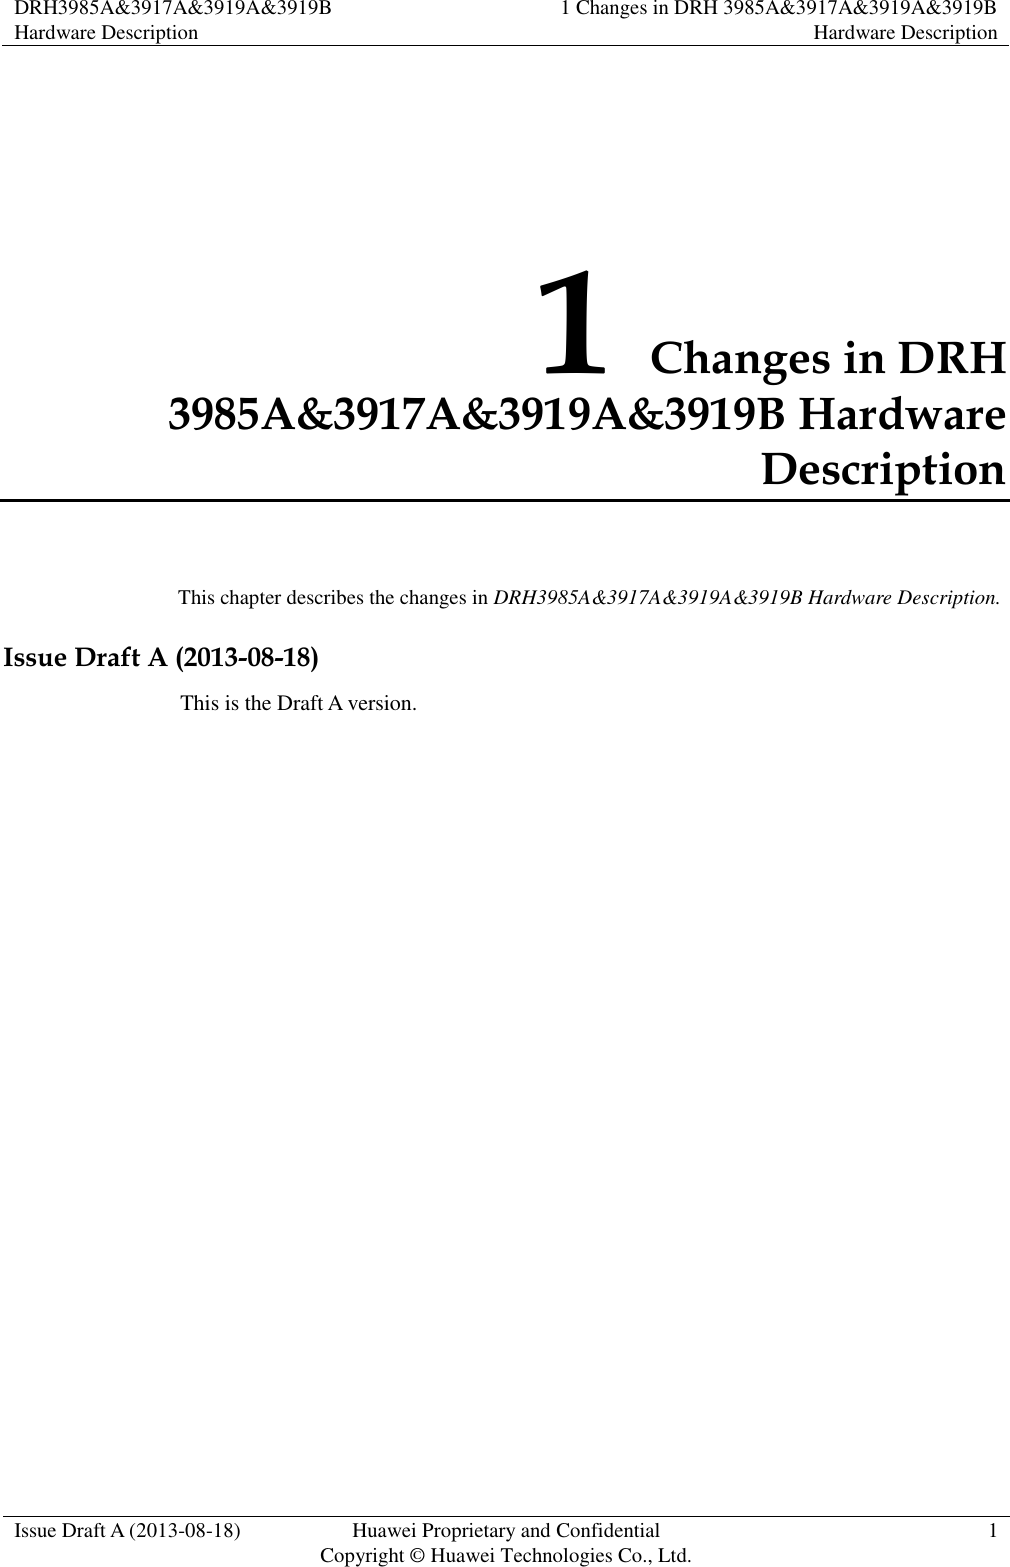 DRH3985A&amp;3917A&amp;3919A&amp;3919B Hardware Description 1 Changes in DRH 3985A&amp;3917A&amp;3919A&amp;3919B Hardware Description  Issue Draft A (2013-08-18) Huawei Proprietary and Confidential                                     Copyright © Huawei Technologies Co., Ltd. 1  1 Changes in DRH 3985A&amp;3917A&amp;3919A&amp;3919B Hardware Description This chapter describes the changes in DRH3985A&amp;3917A&amp;3919A&amp;3919B Hardware Description. Issue Draft A (2013-08-18) This is the Draft A version. 